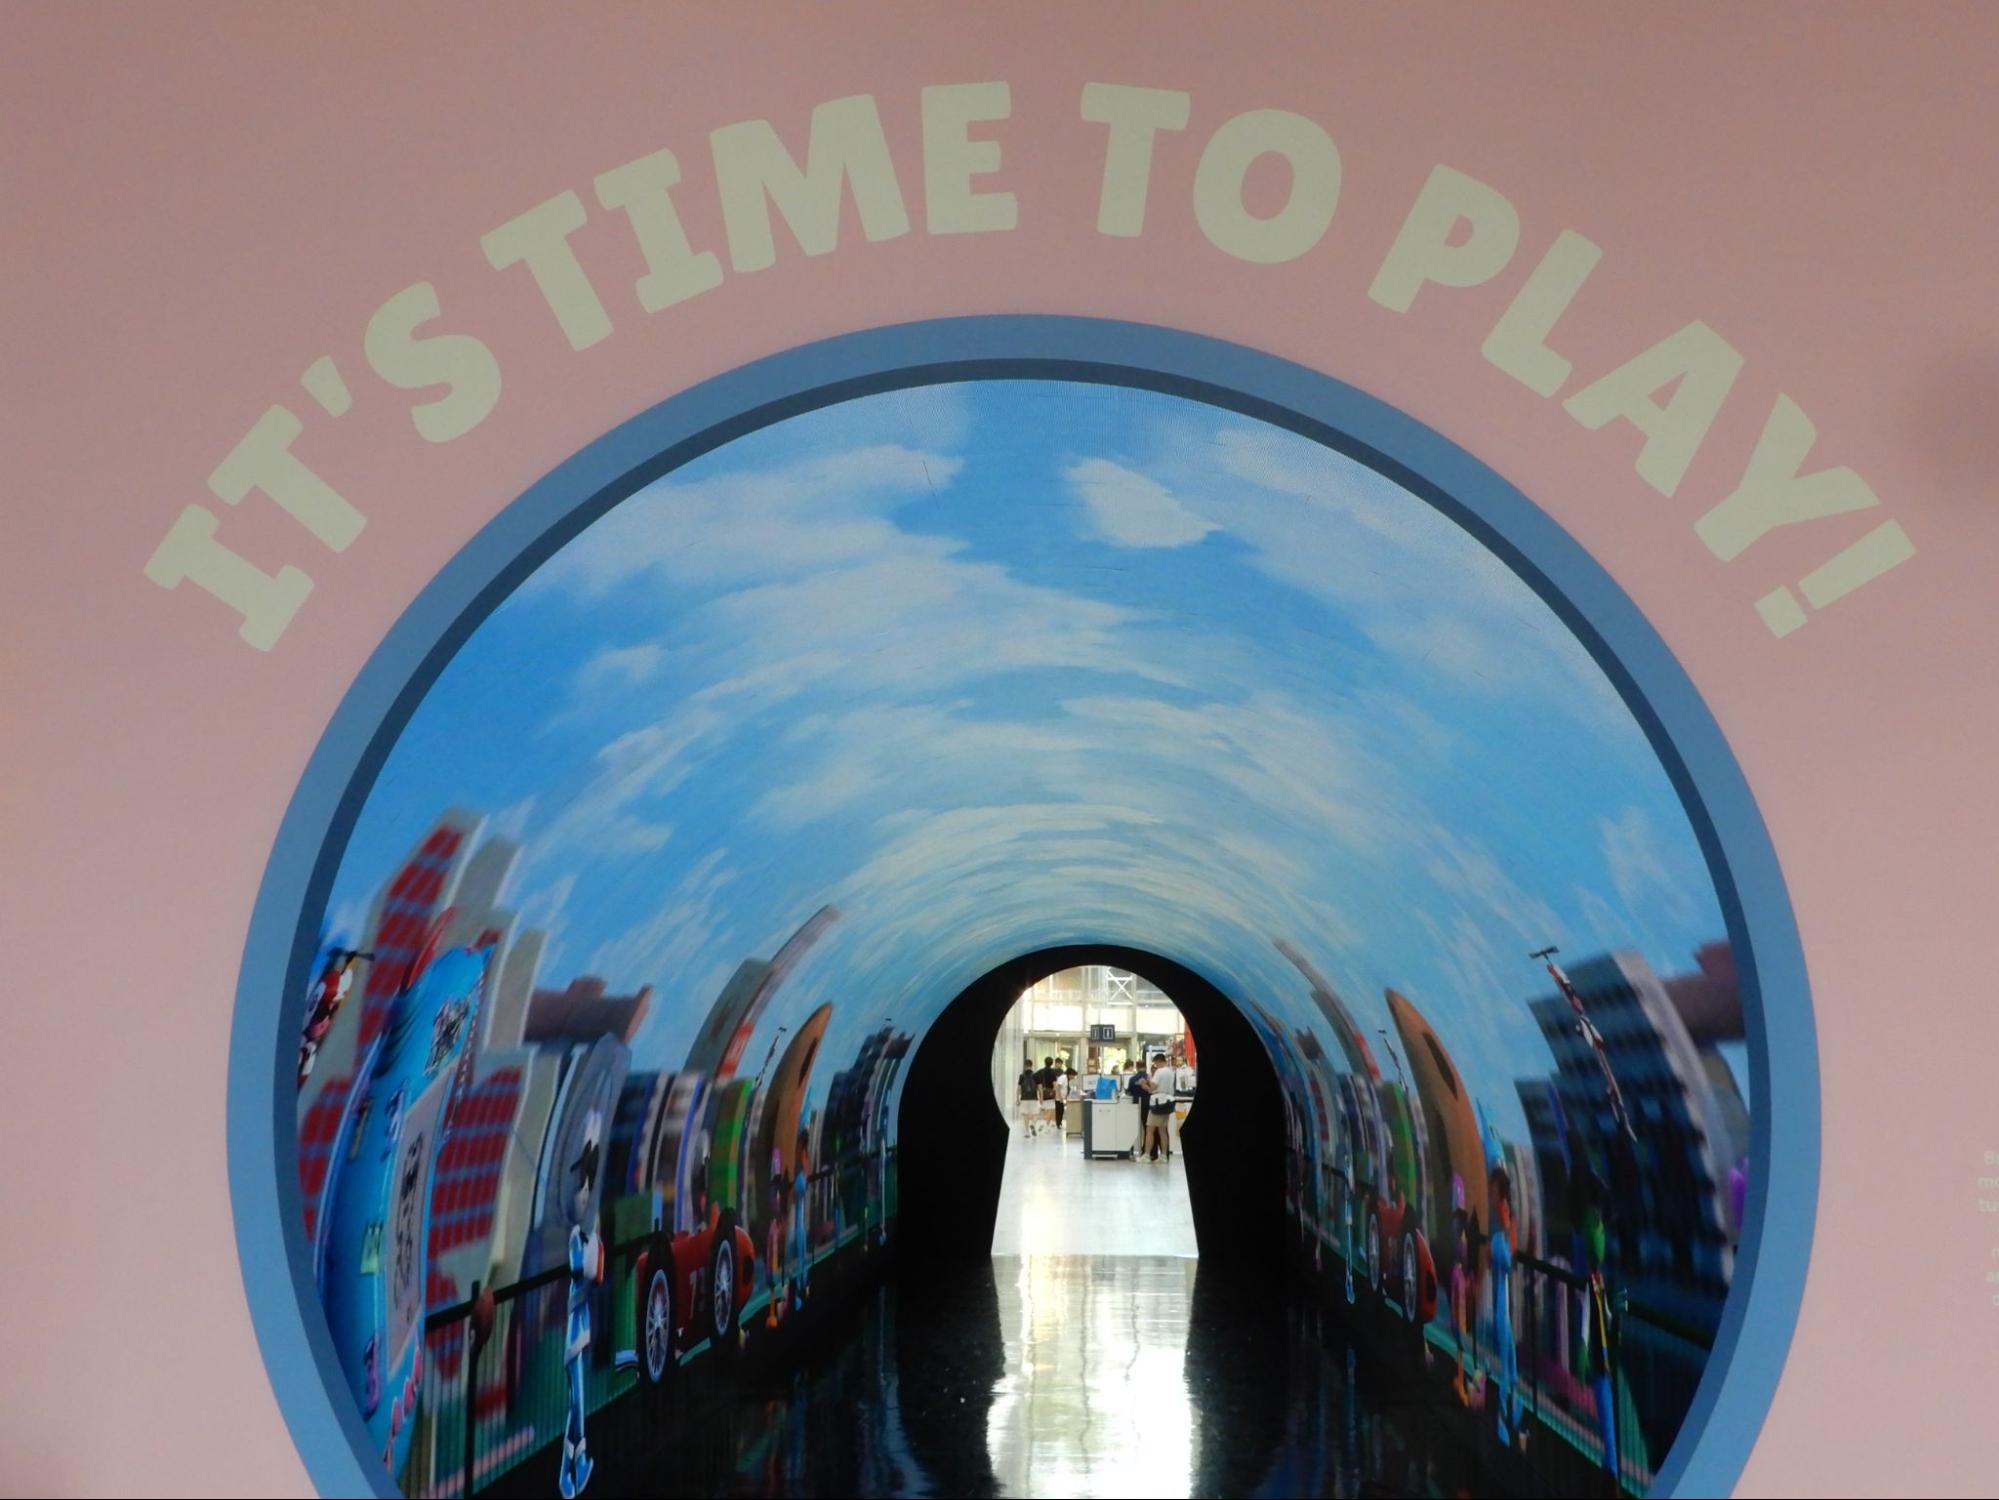 play:date national museum of singapore - art tunnel entrance